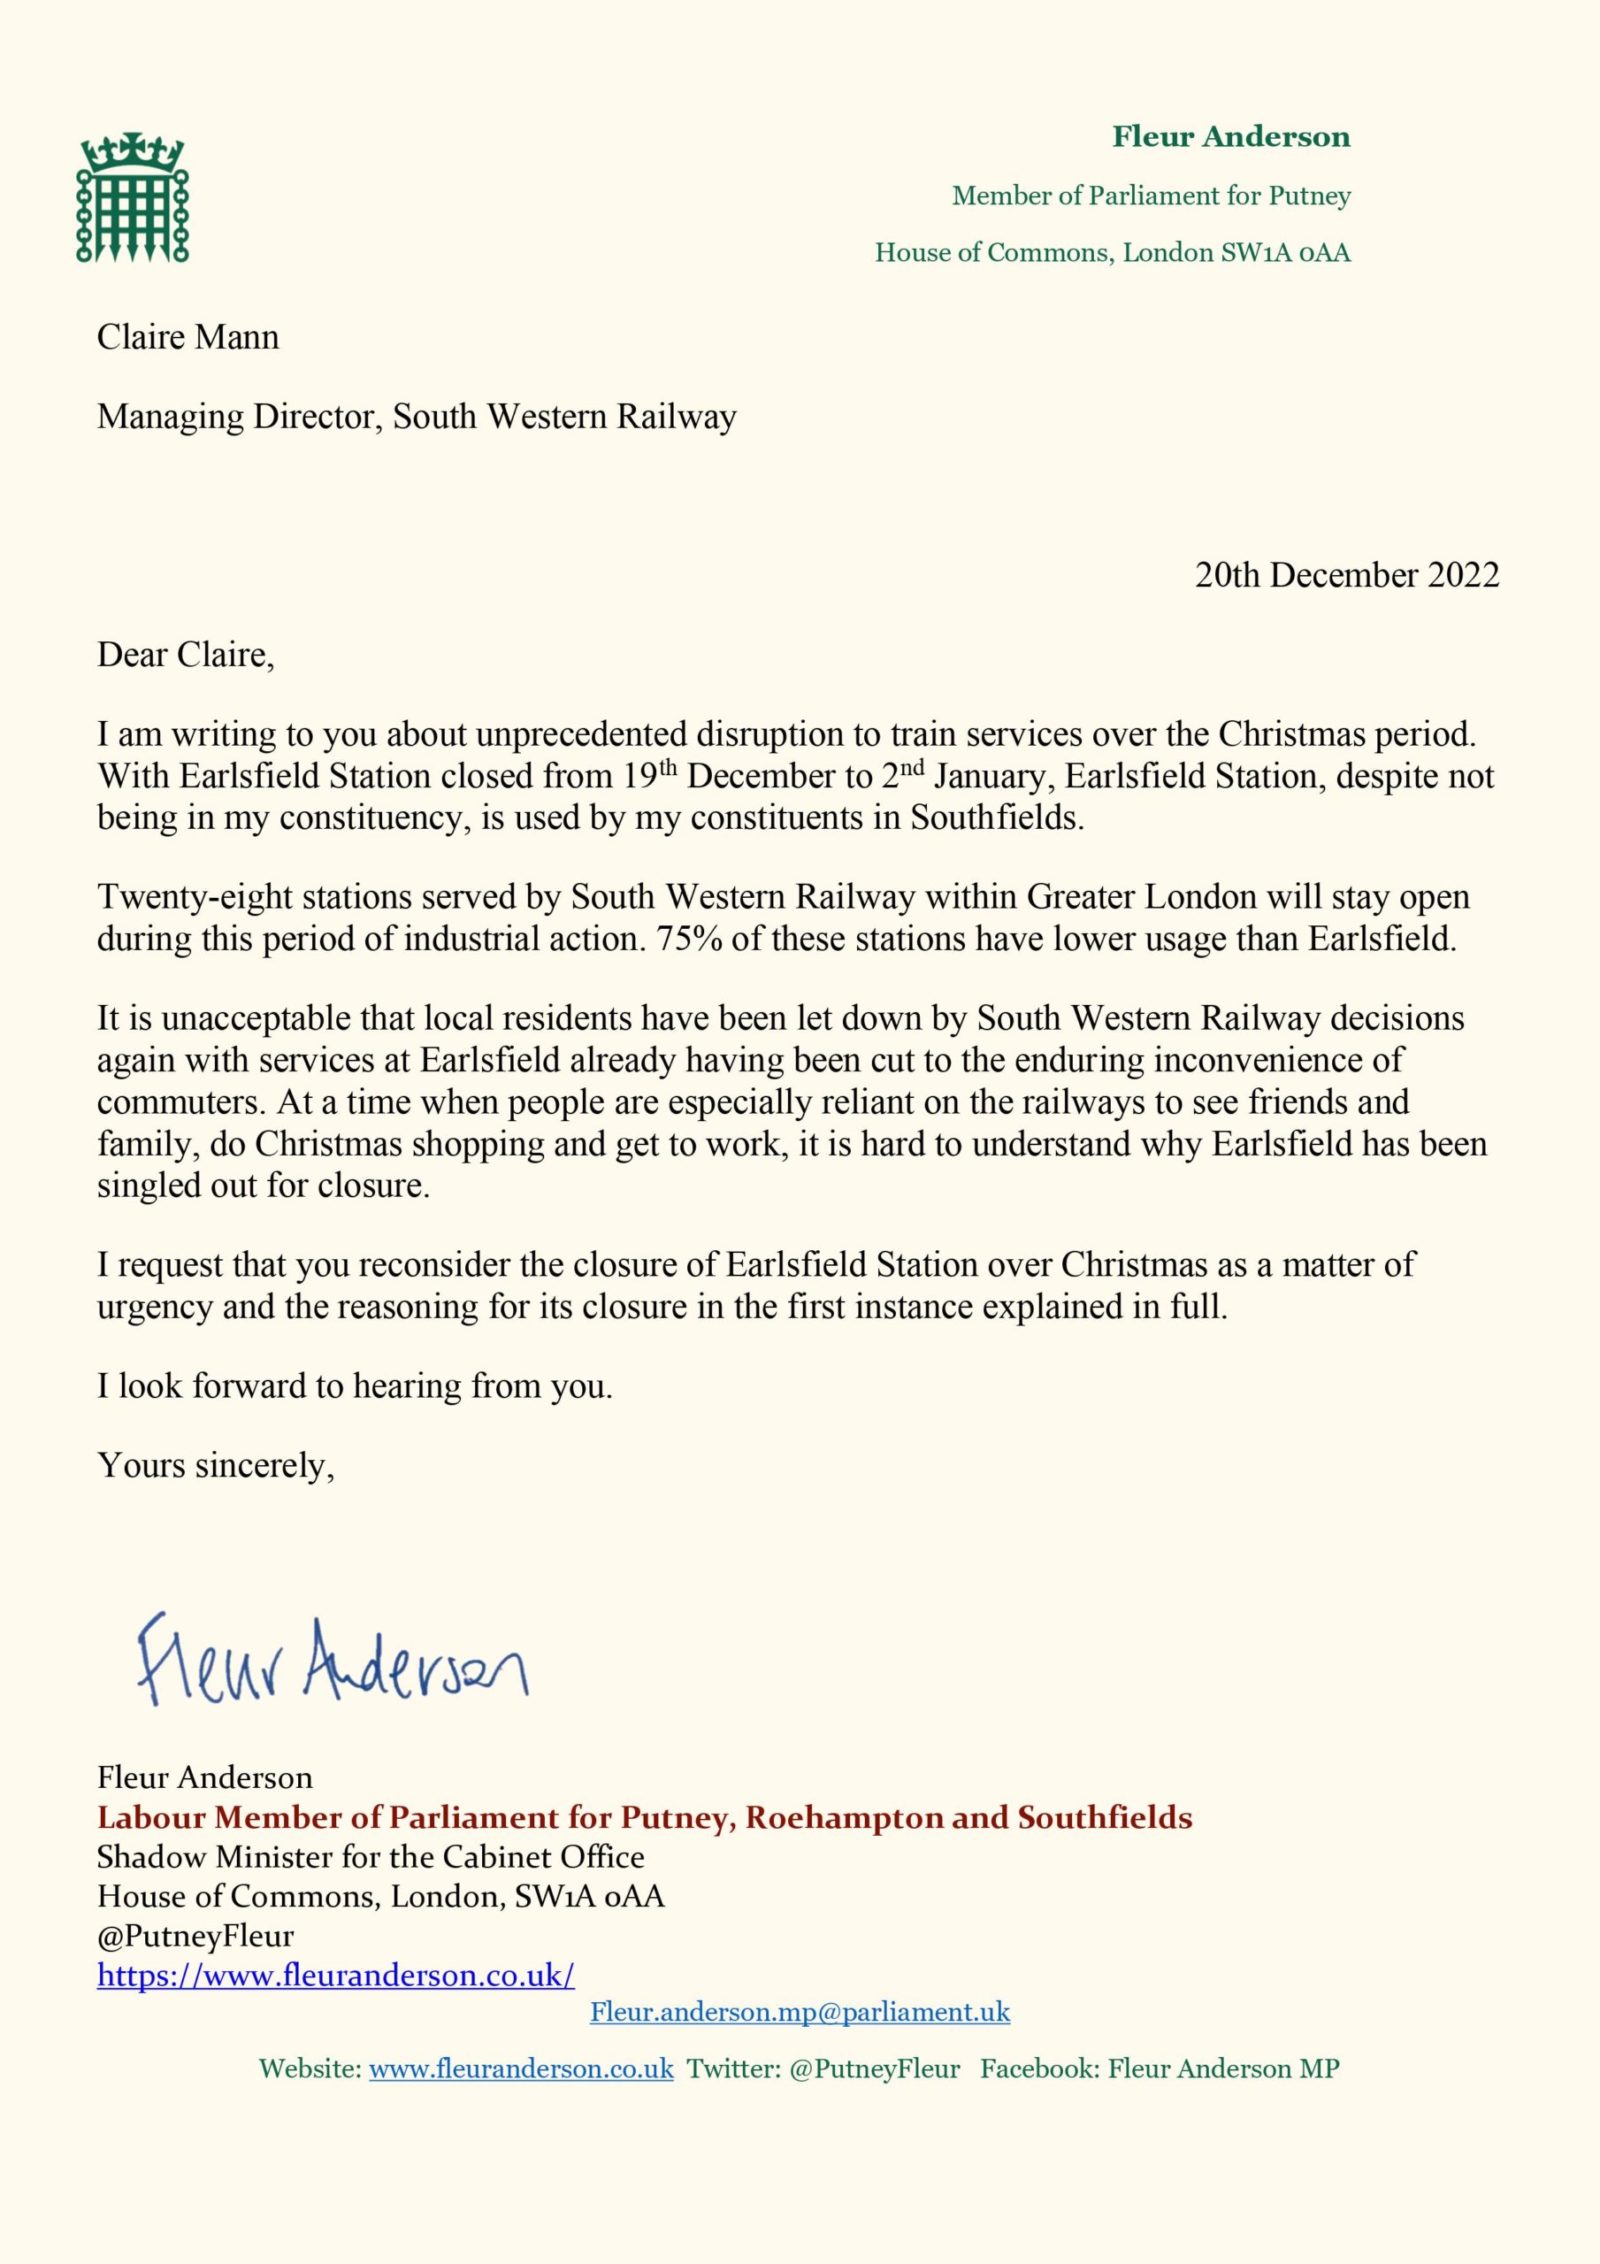 Letter to South Western Railway